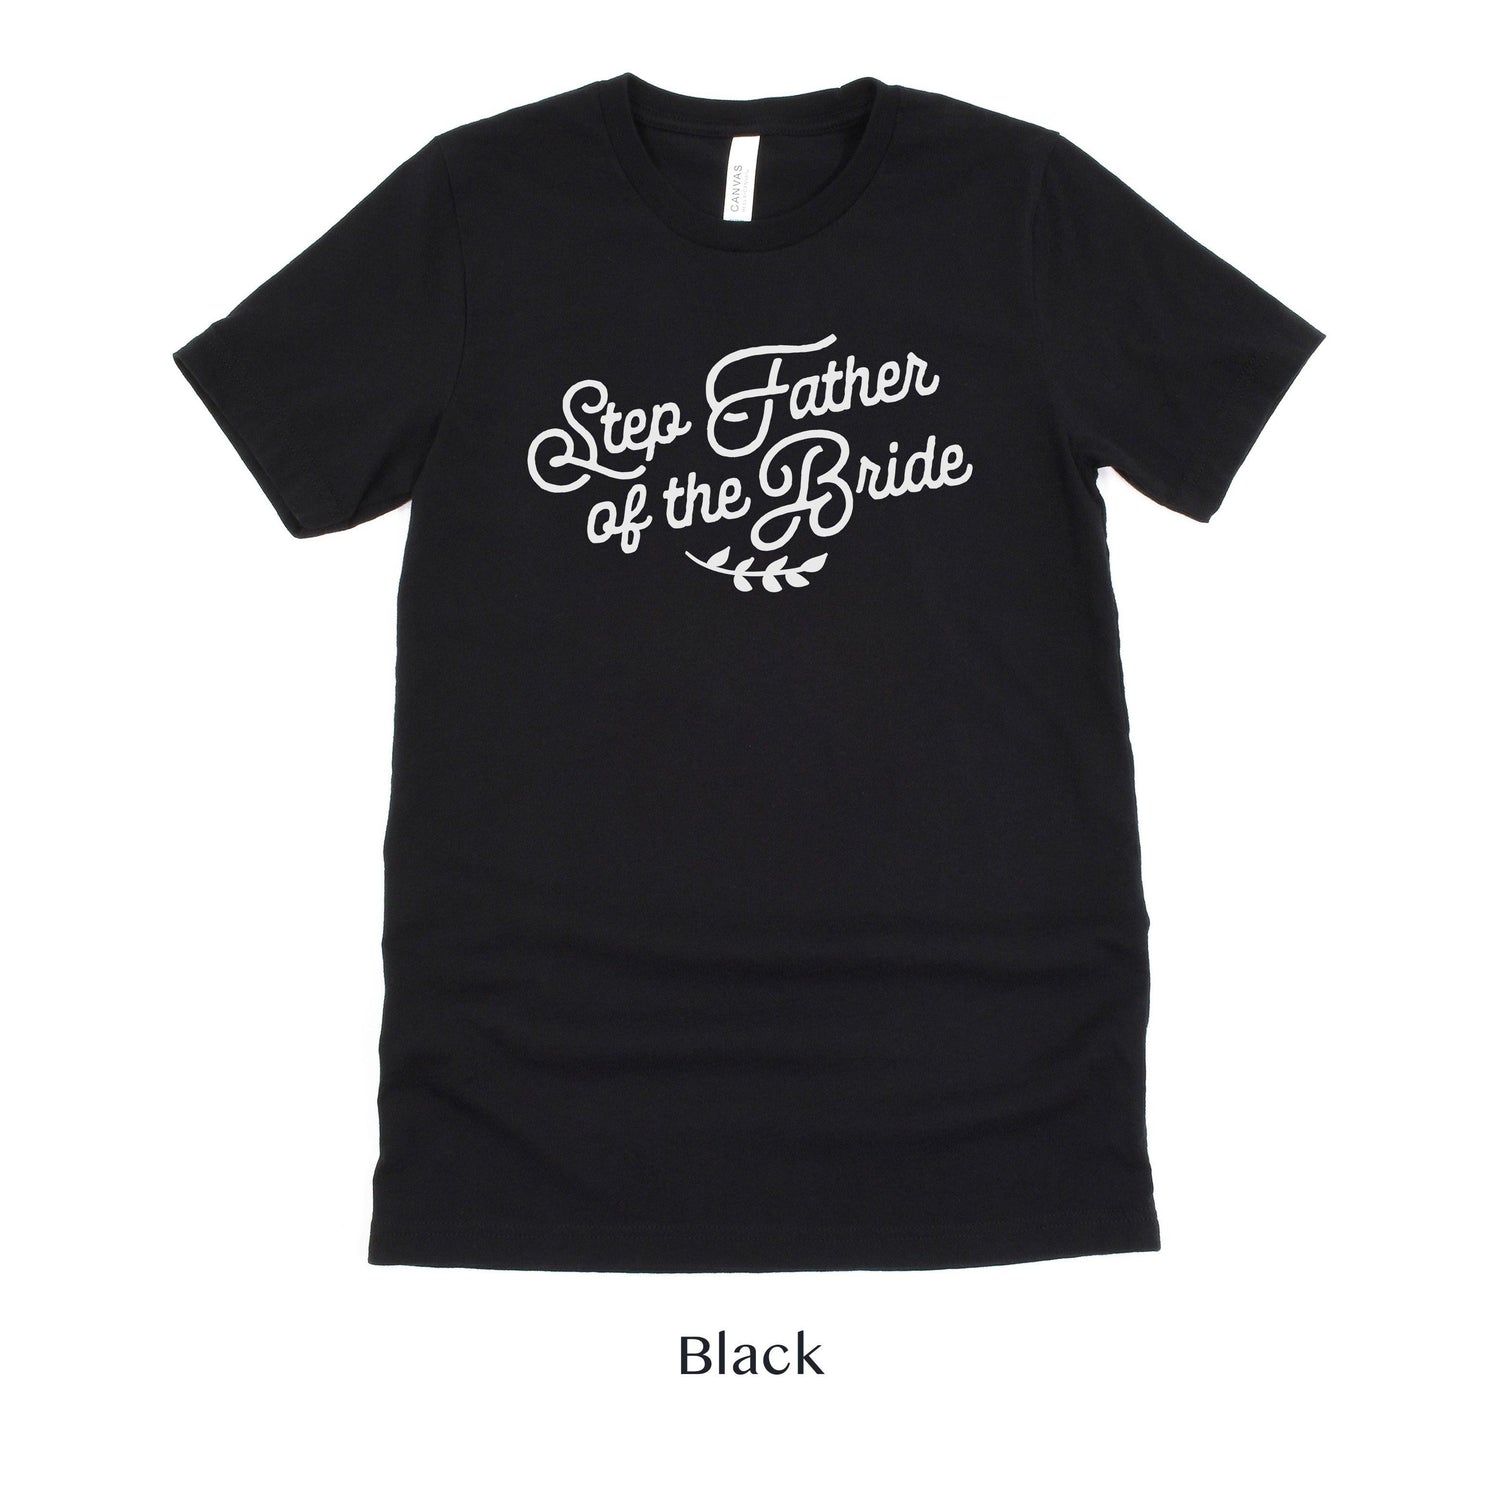 Step Father of the Bride Short-sleeve Tee by Oaklynn Lane